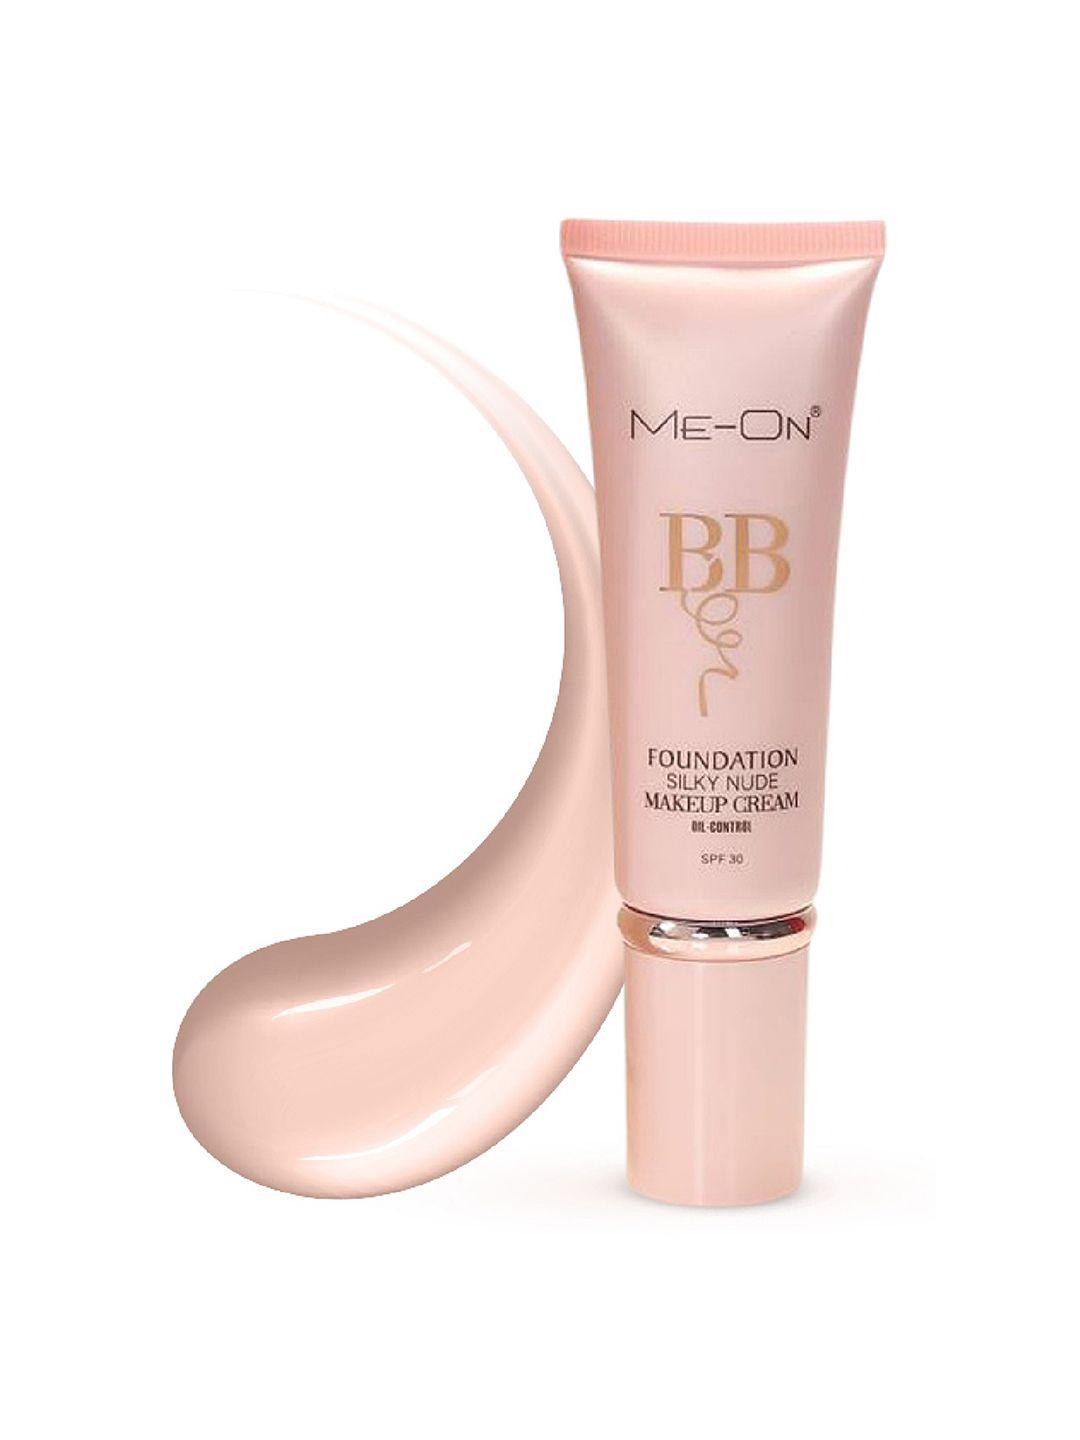 me-on bb cream oil control foundation with spf30 38ml - pearl 01